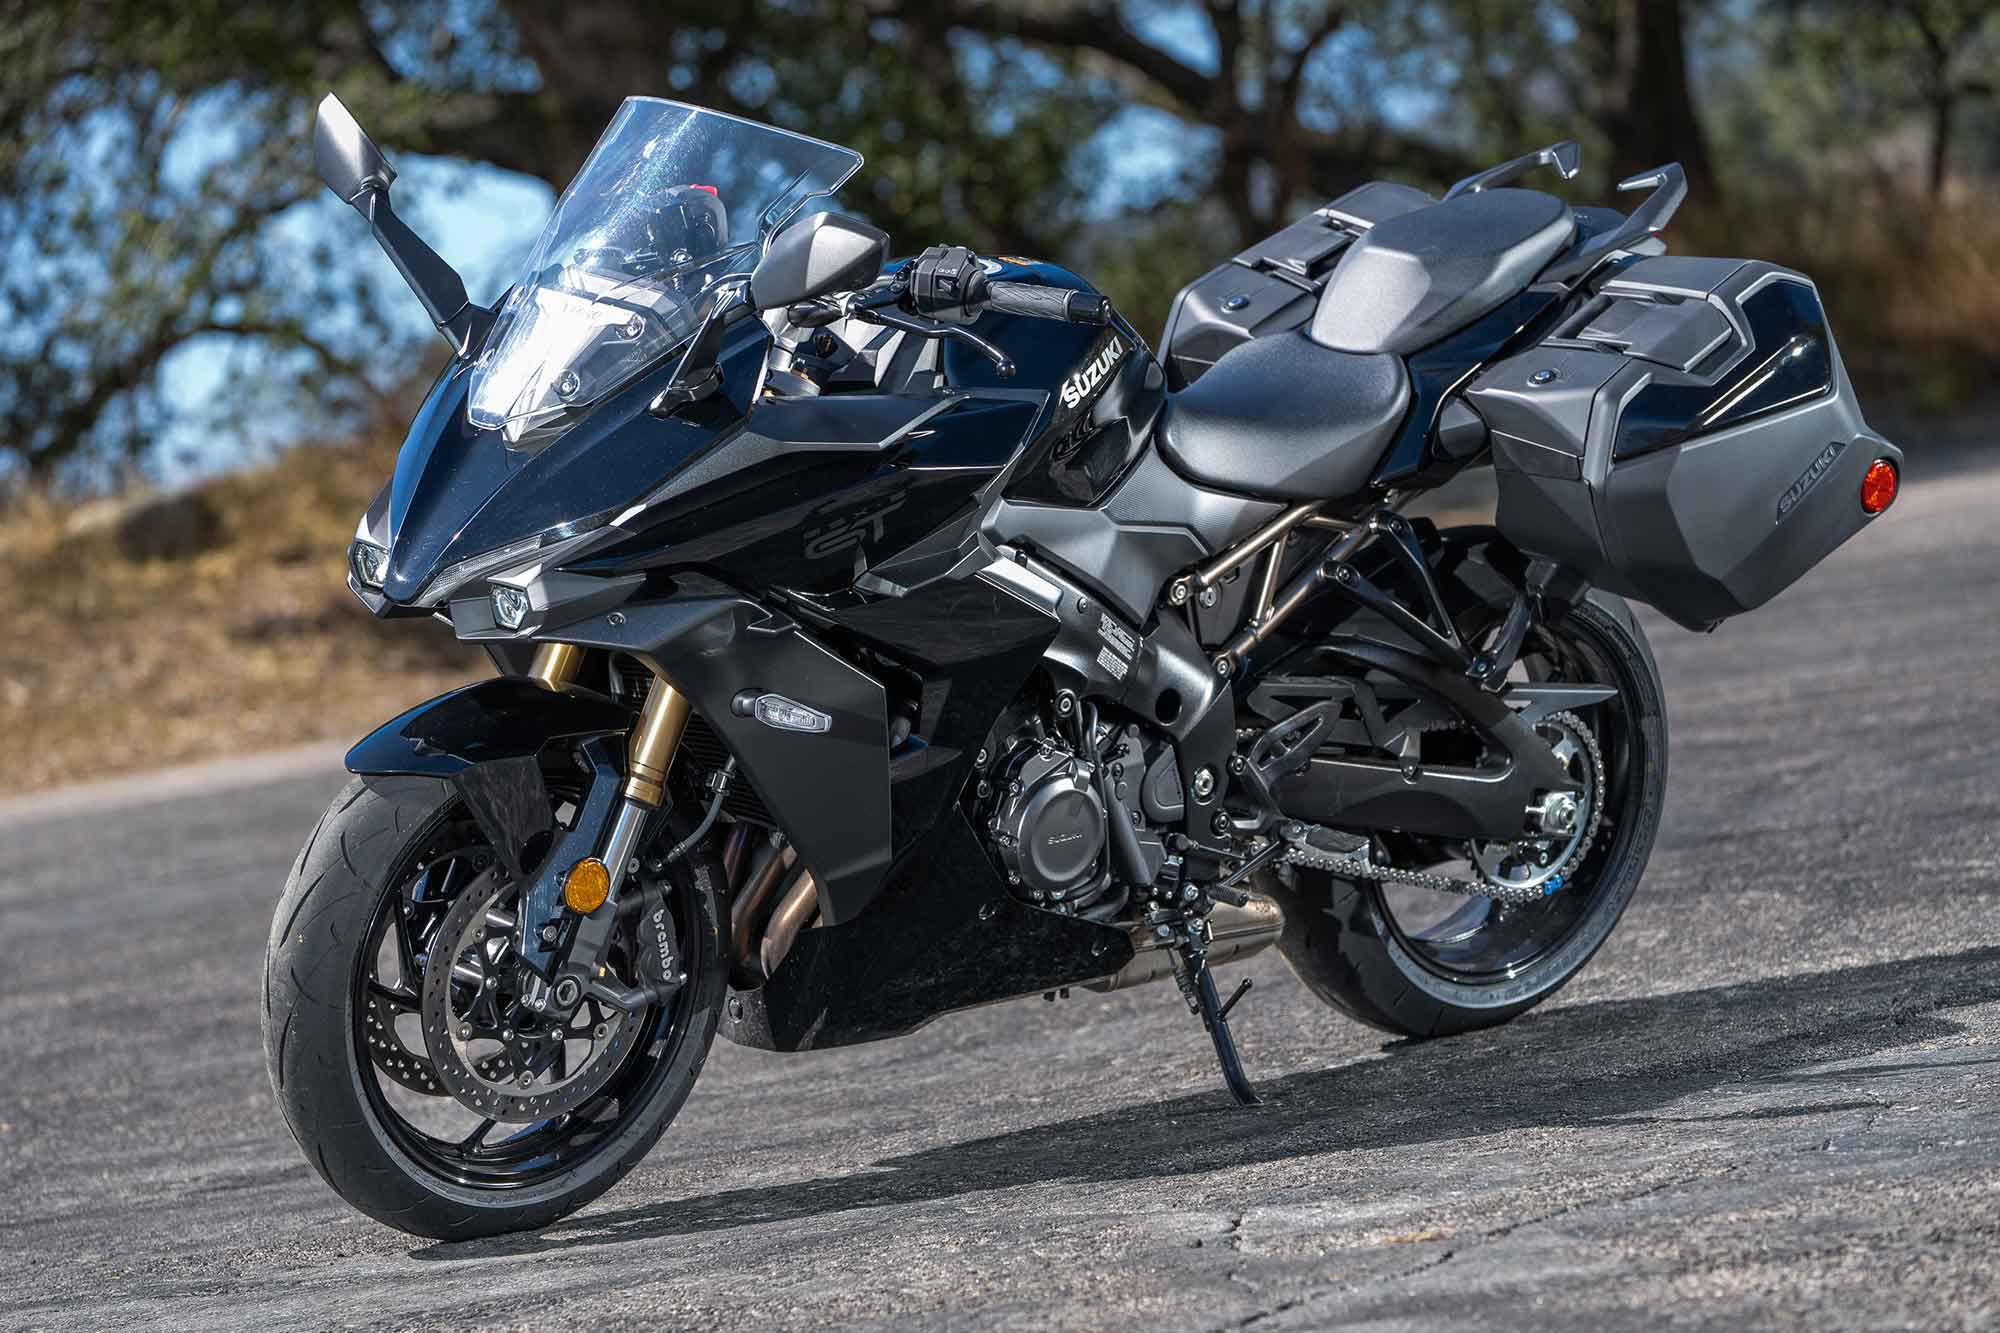 Suzuki offers sport-minded touring riders something special with its affordable GSX-S1000GT+.